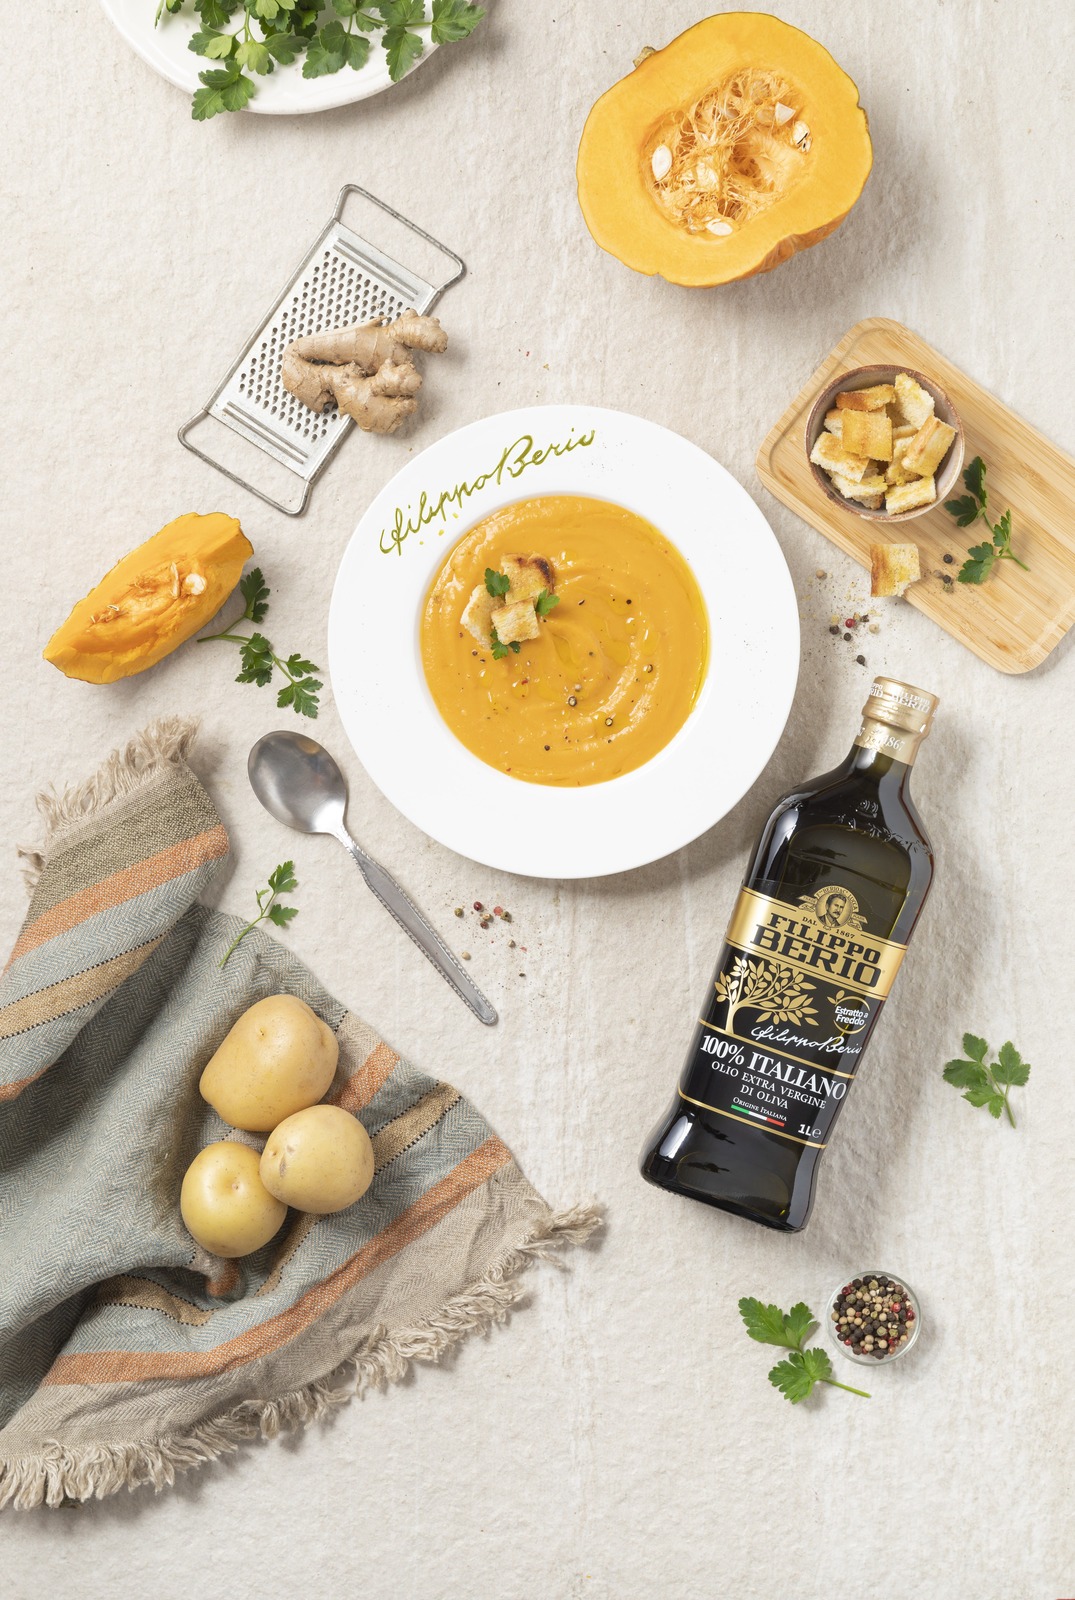 Filippo Berio 100% Italian: the ideal Extra Virgin Olive Oil for adding substance to all of your dishes, including winter recipes like pumpkin and ginger soup.